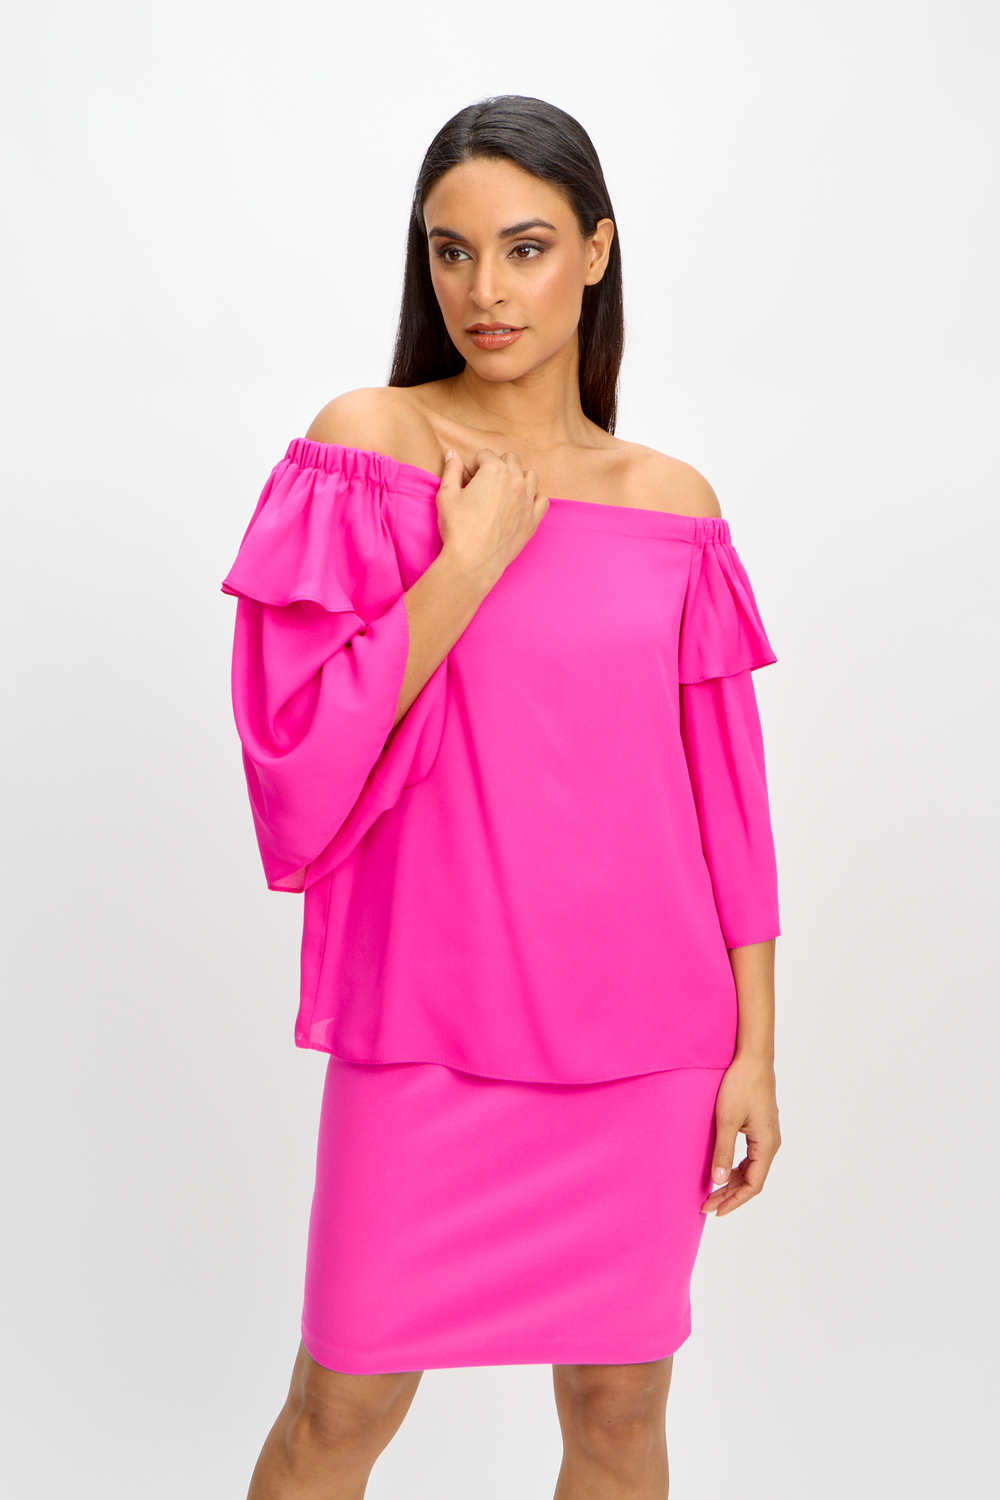 Flounce Sleeve Off-Shoulder Top Style 241305. Ultra Pink